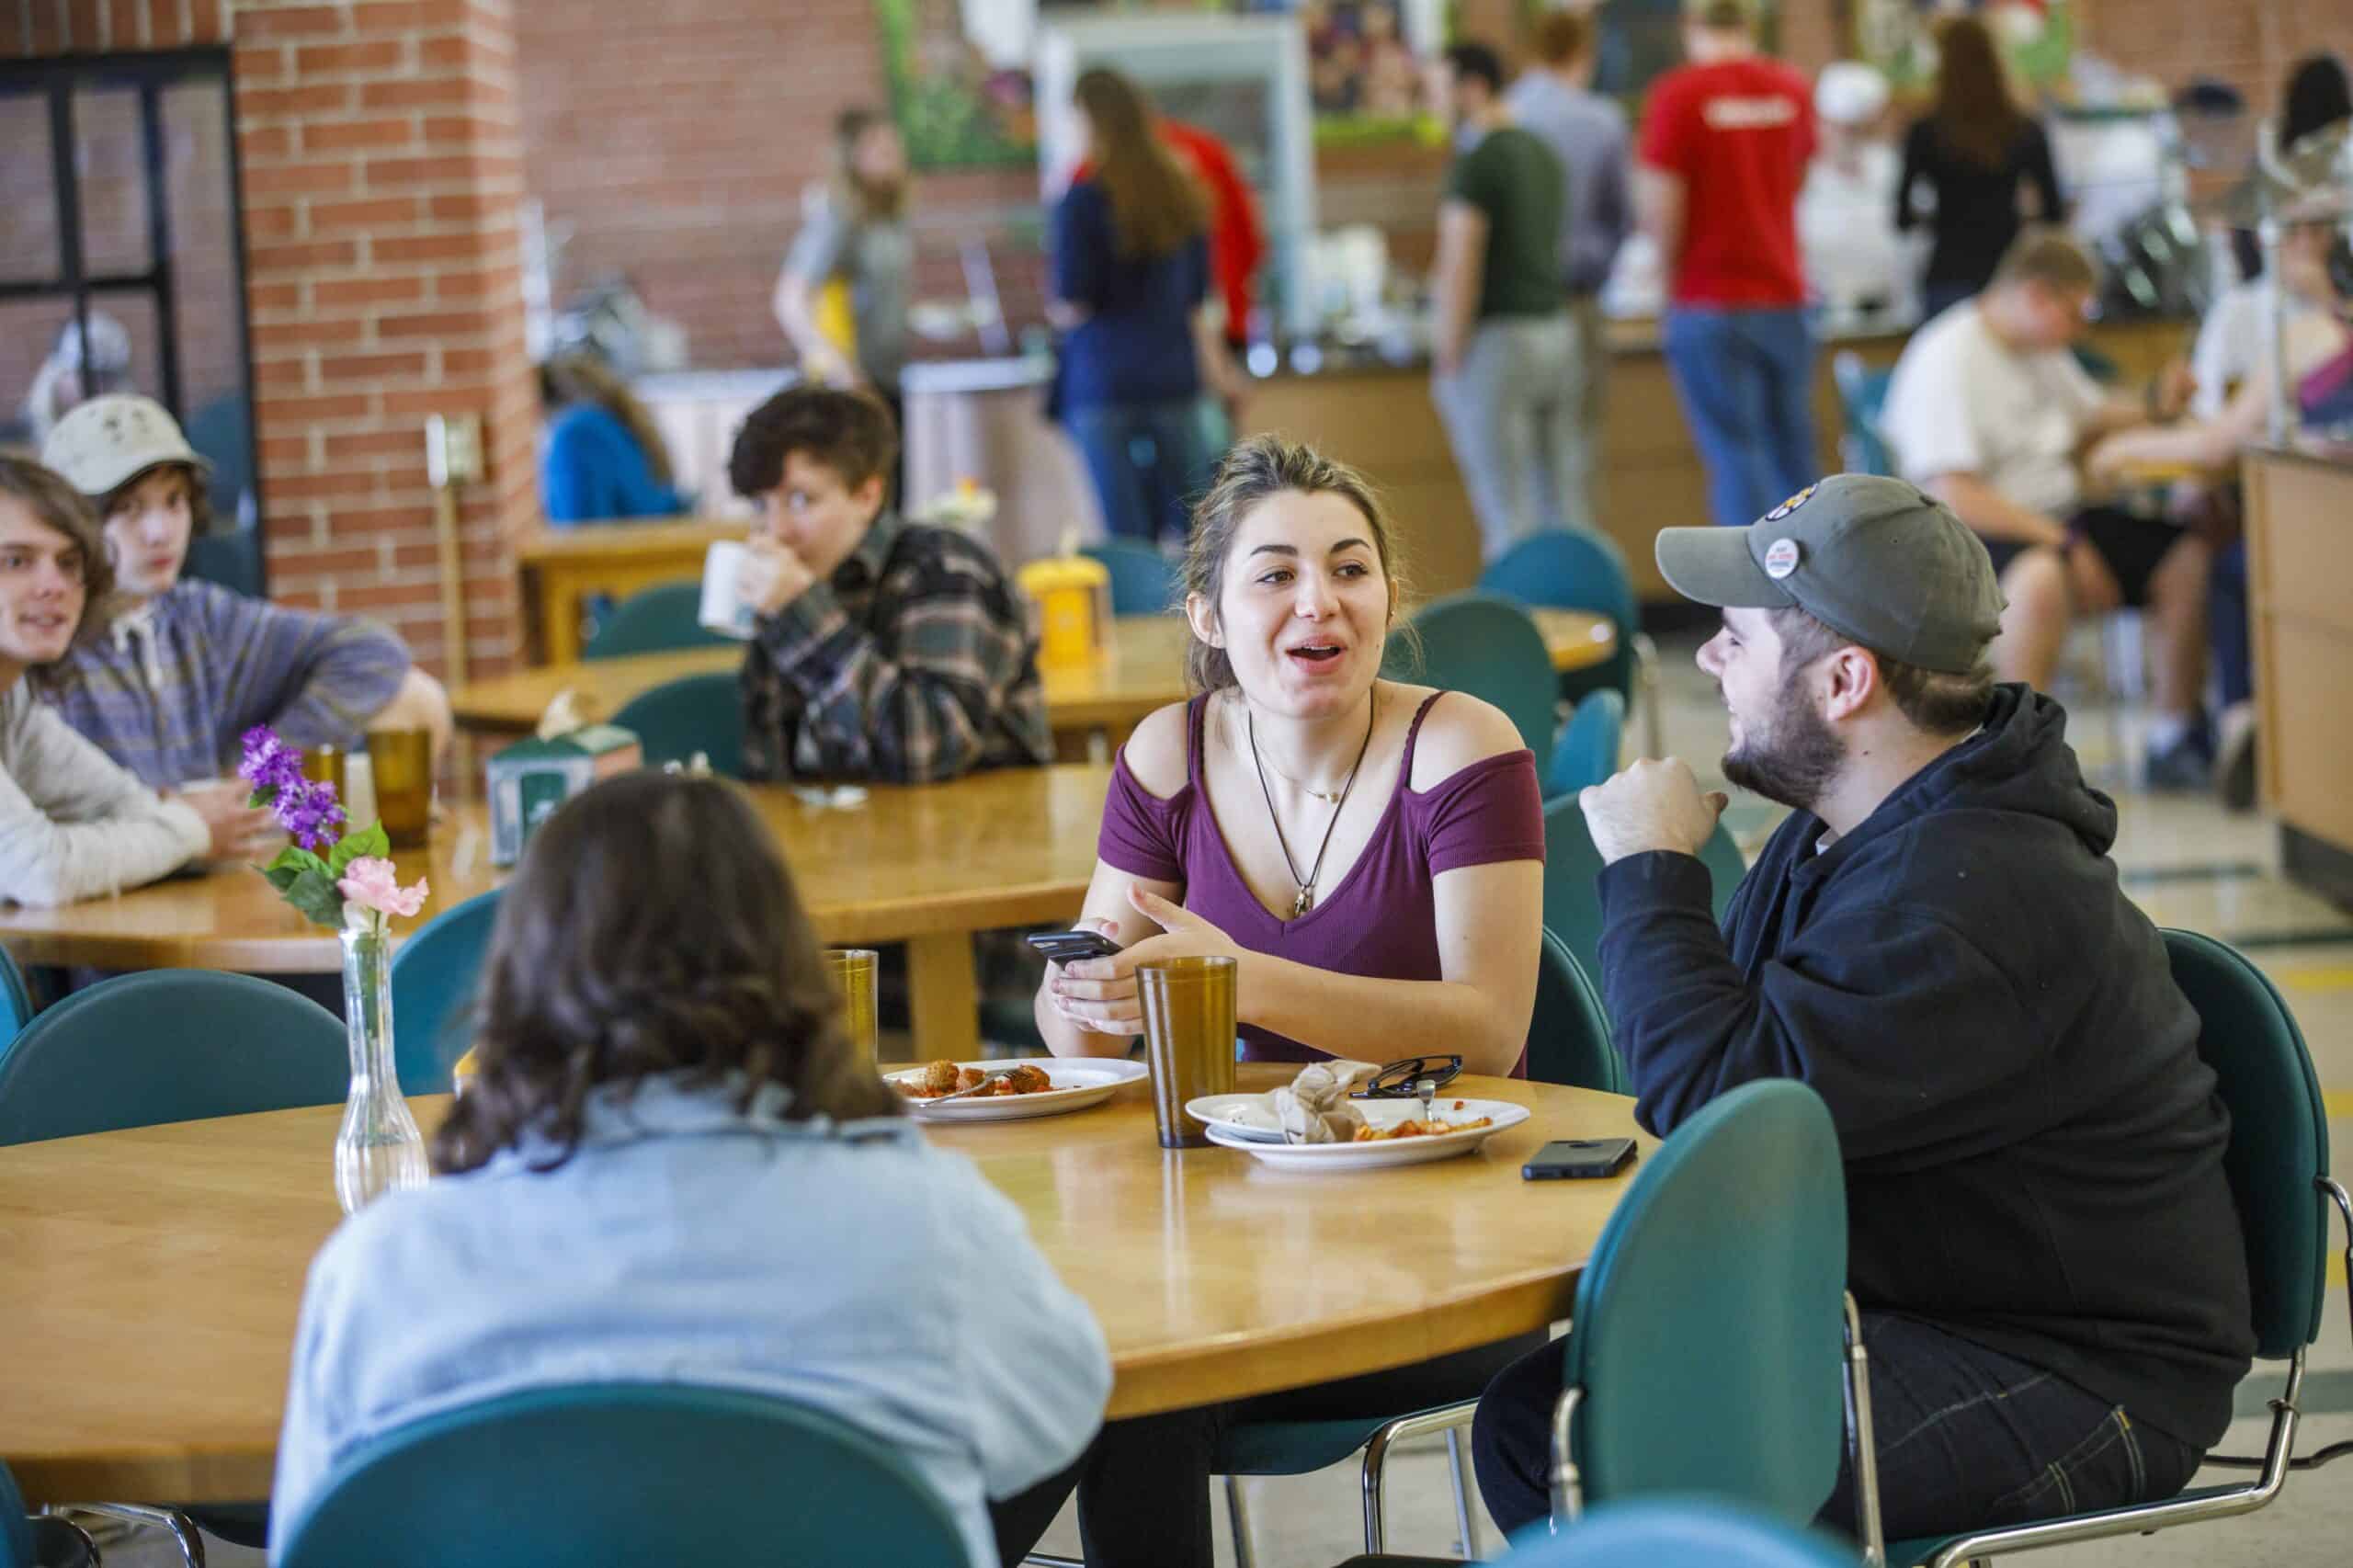 A girl is mid laugh as she's chatting with two friends at a table. They are in a cafeteria and there is a crowd of people in the background.